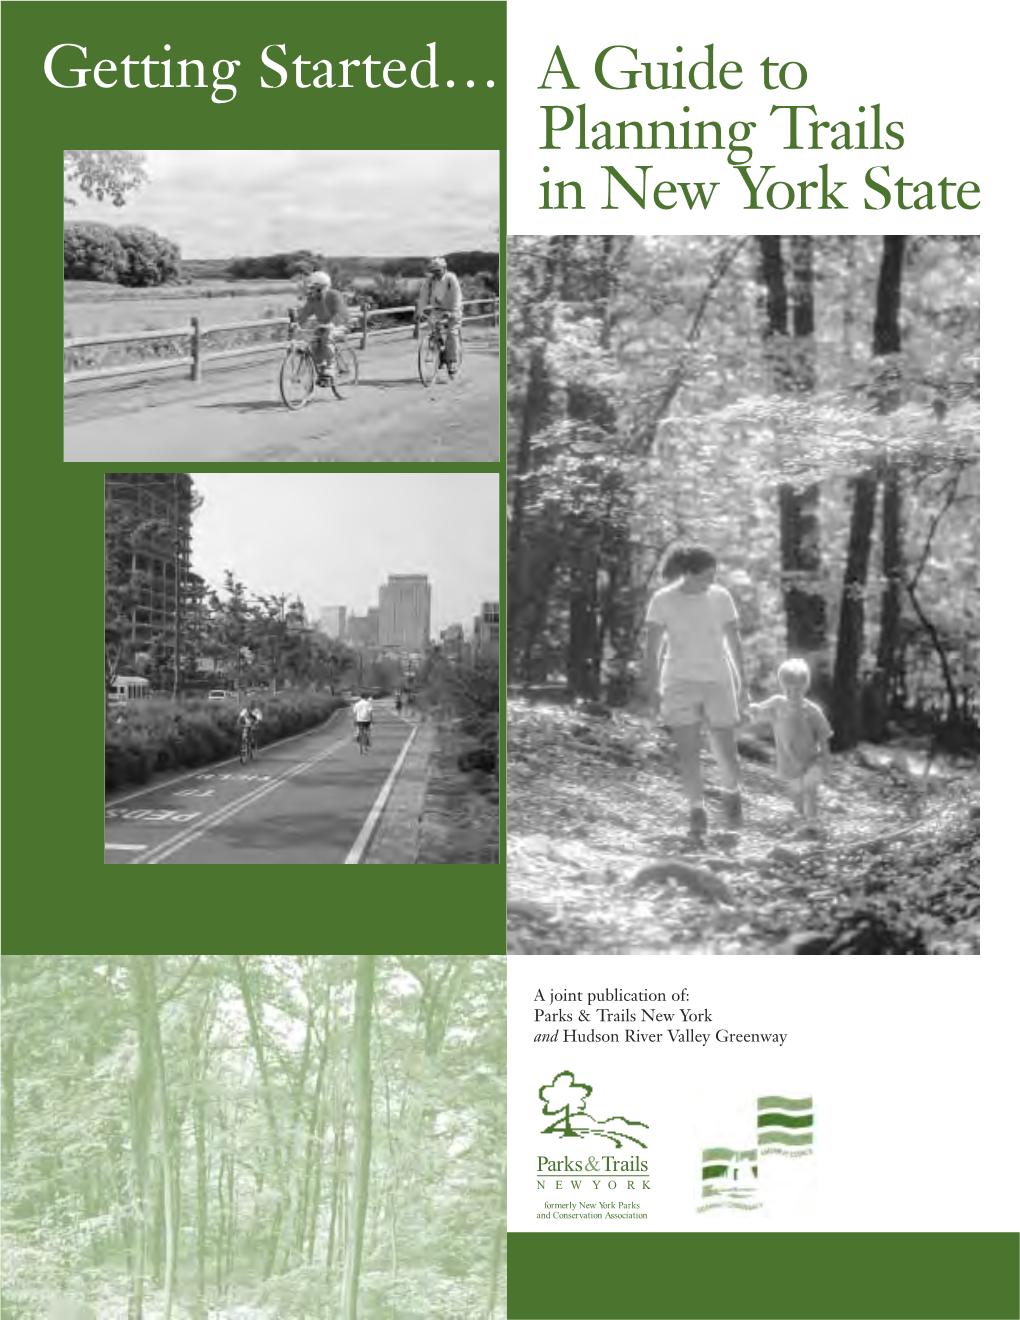 Getting Started: a Guide to Planning Trails in New York State Is Based on the Experience of Many Successful Trail Organizers